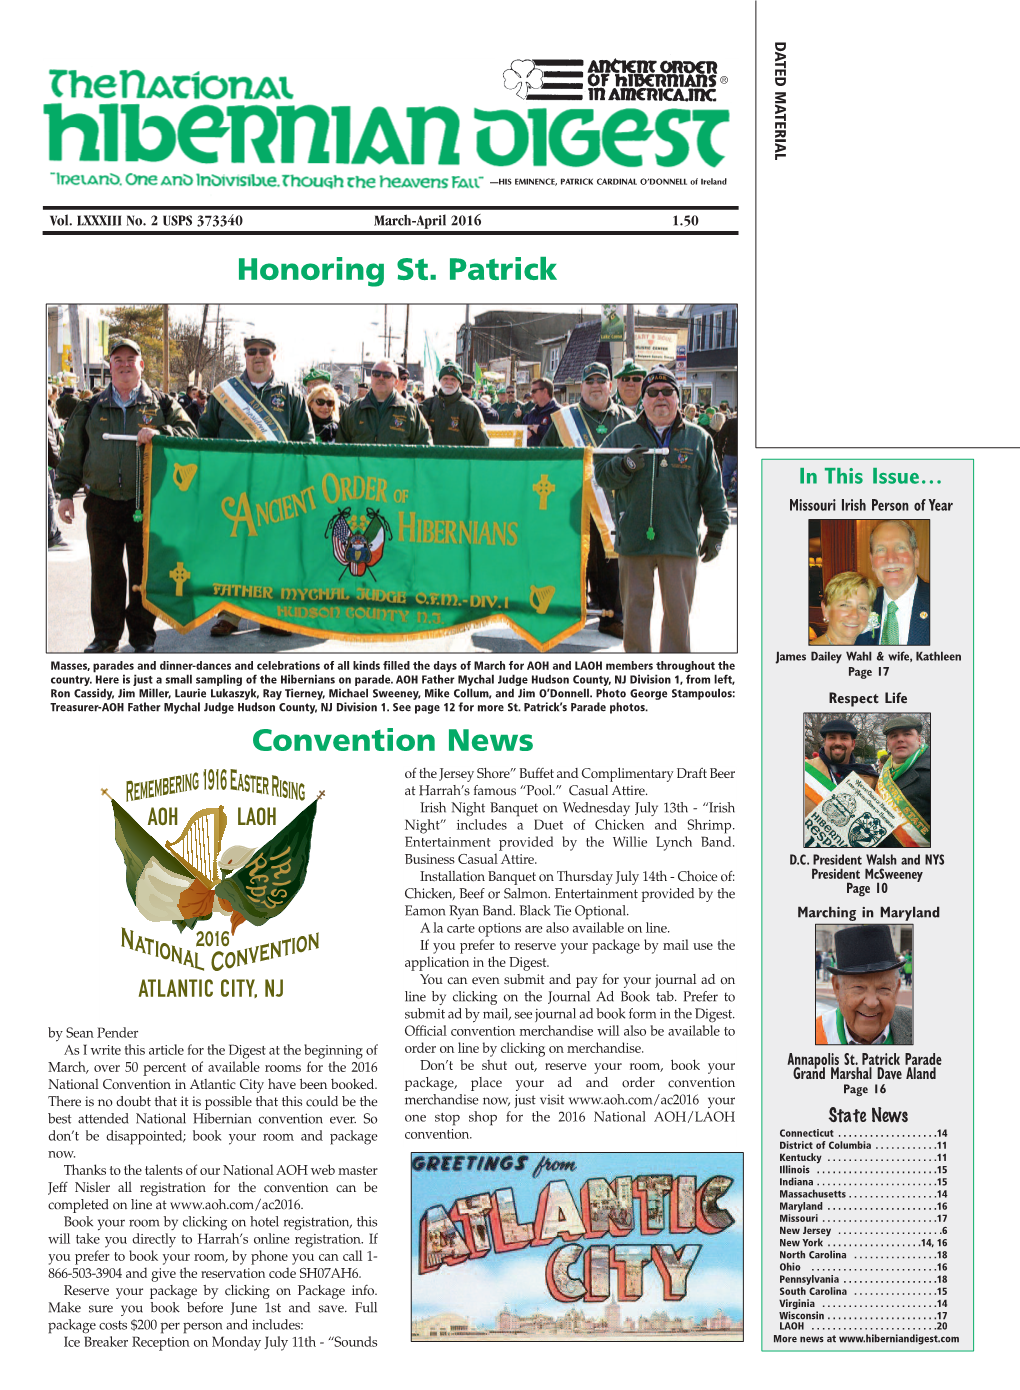 Honoring St. Patrick Convention News